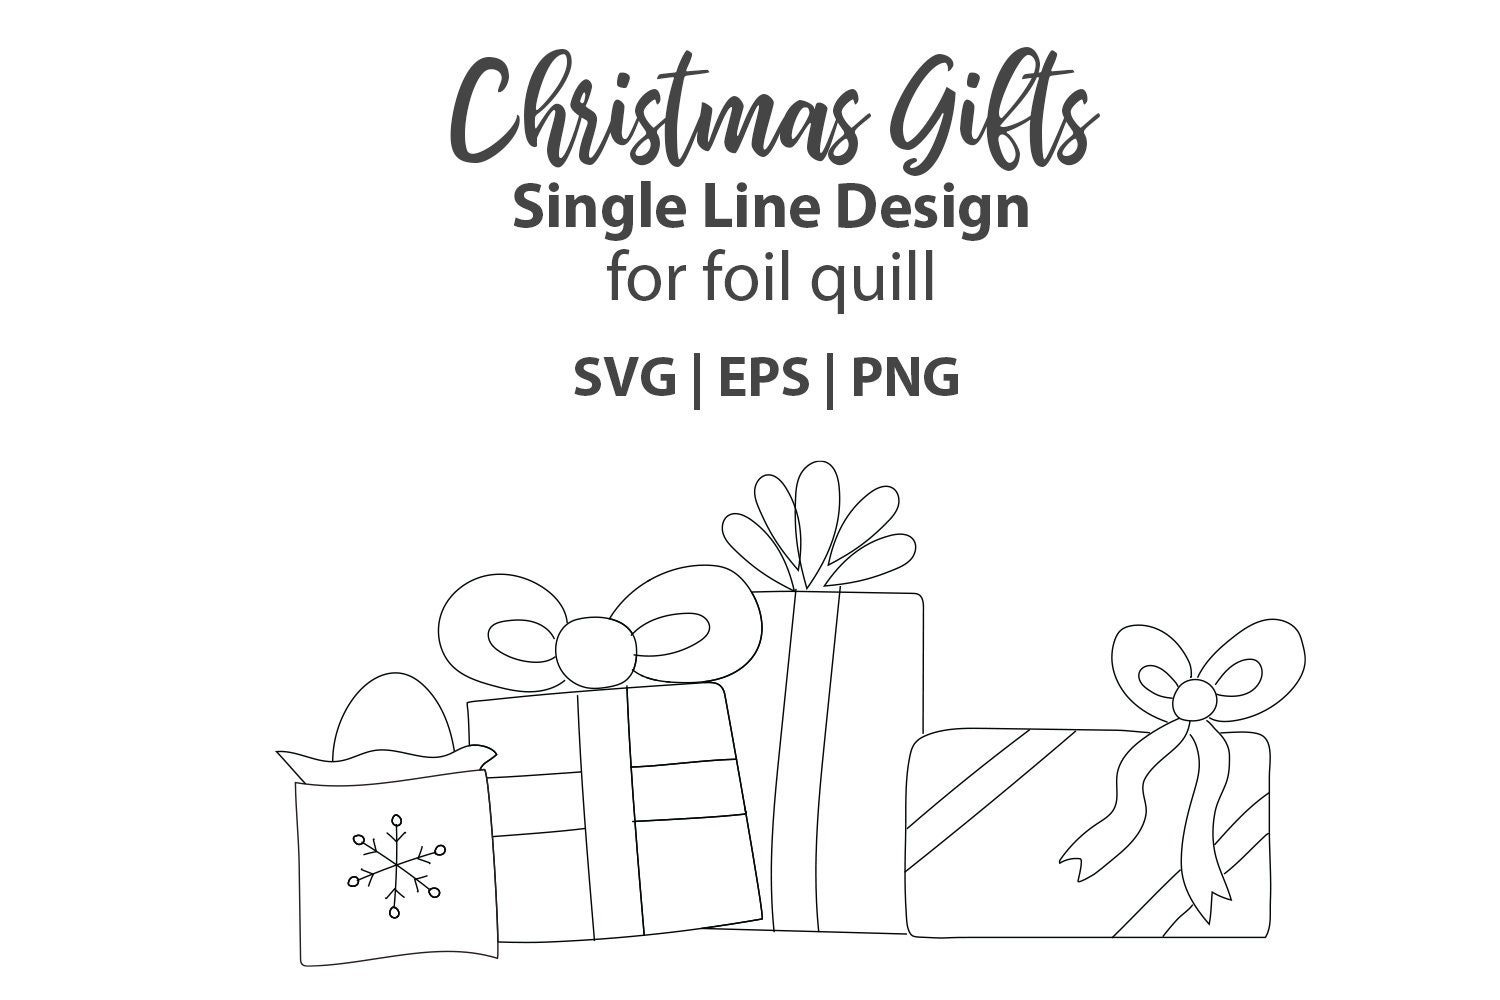 Single Line Christmas for Foil Quill 1 Graphic by Slim Studio